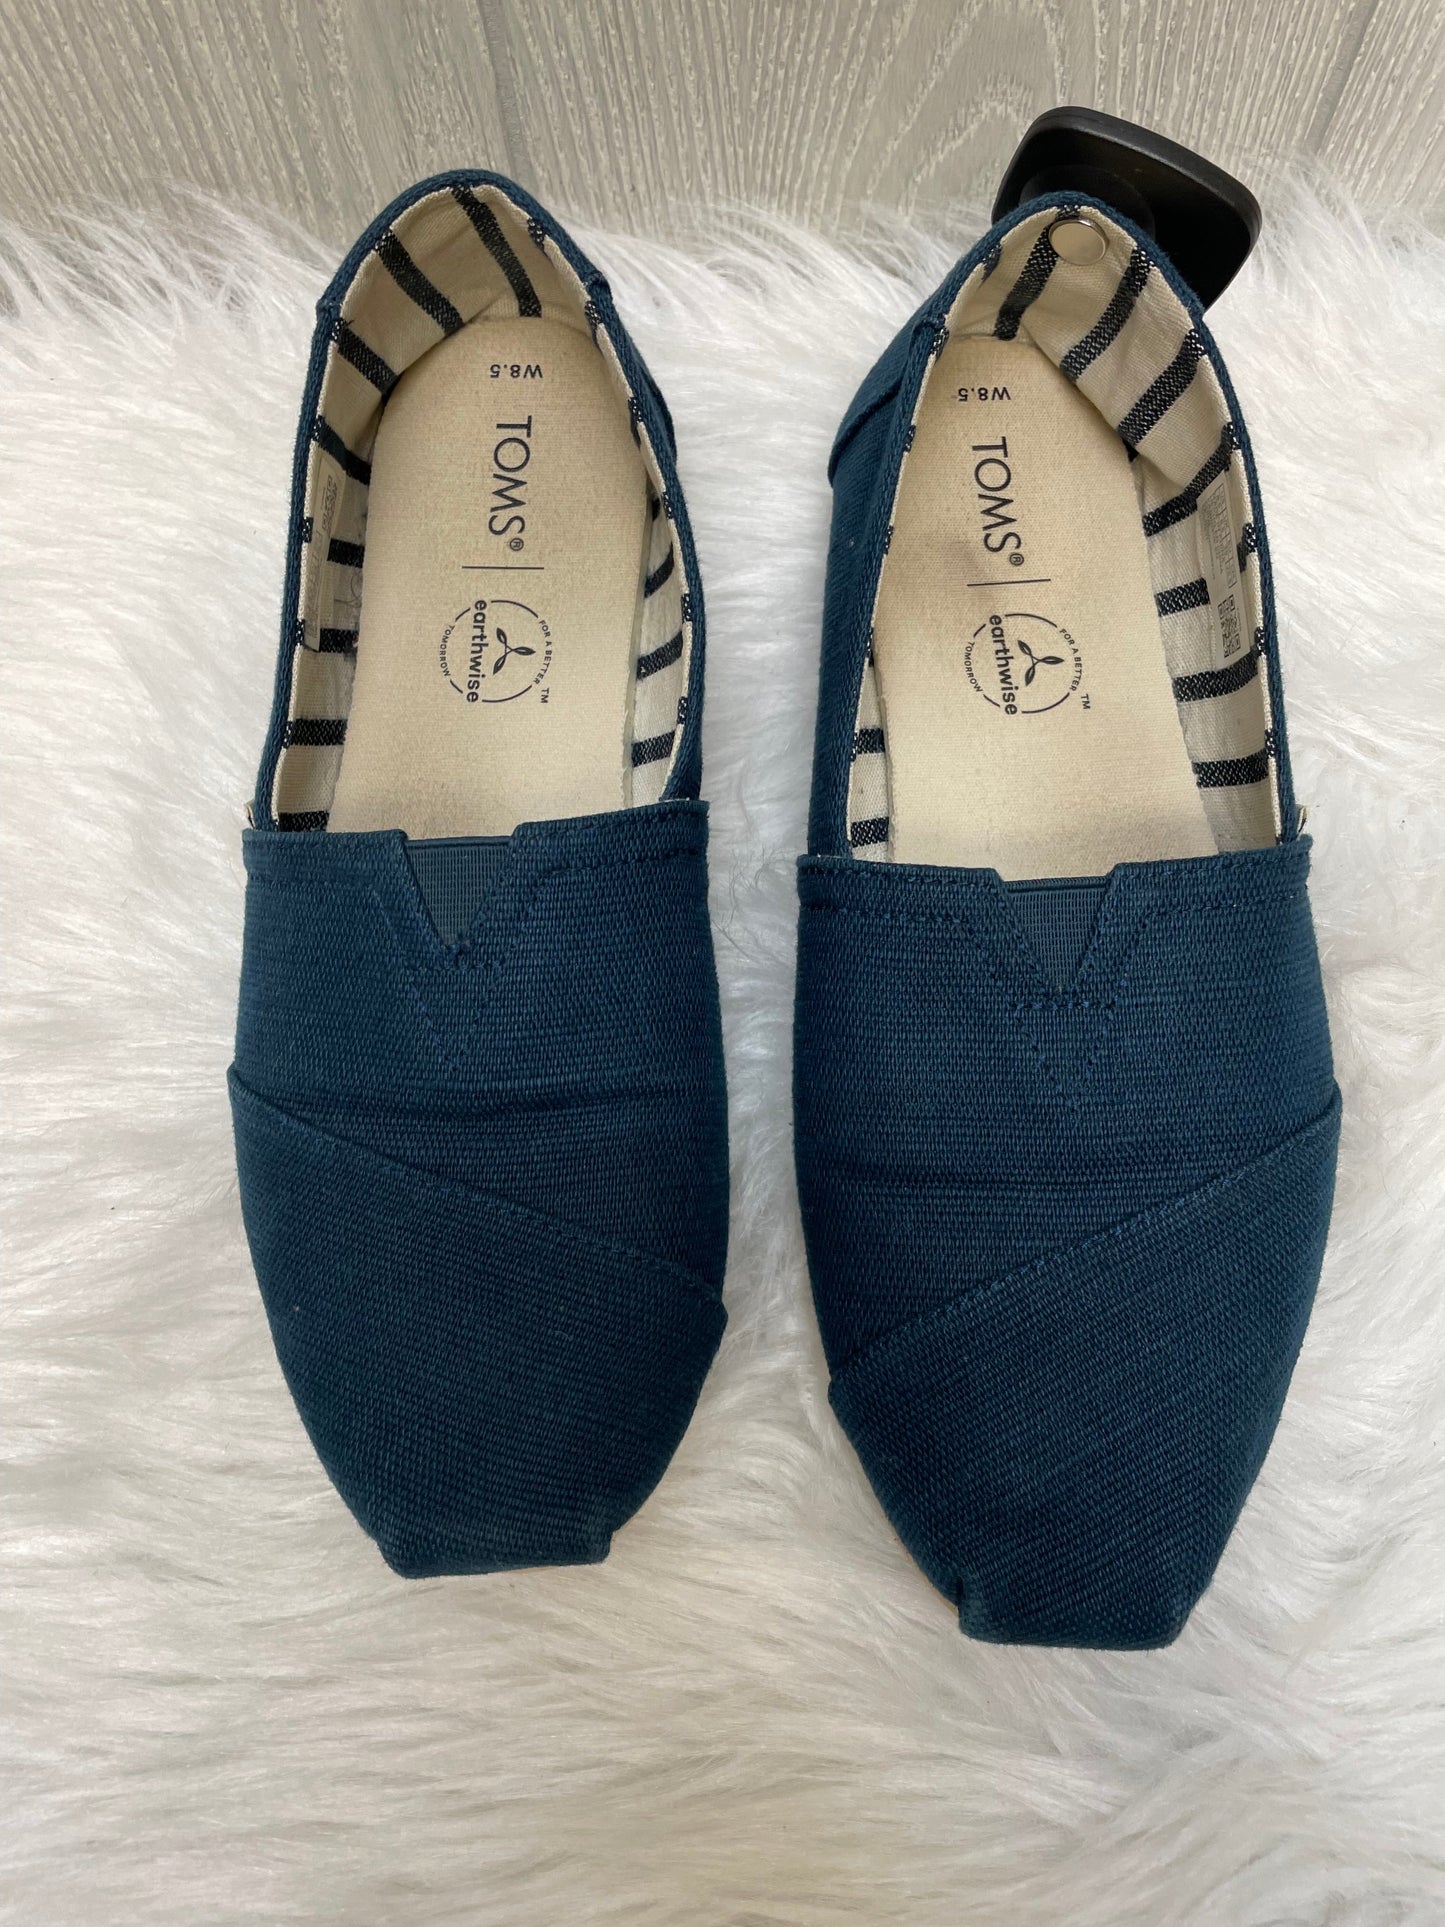 Navy Shoes Flats Toms, Size 8.5